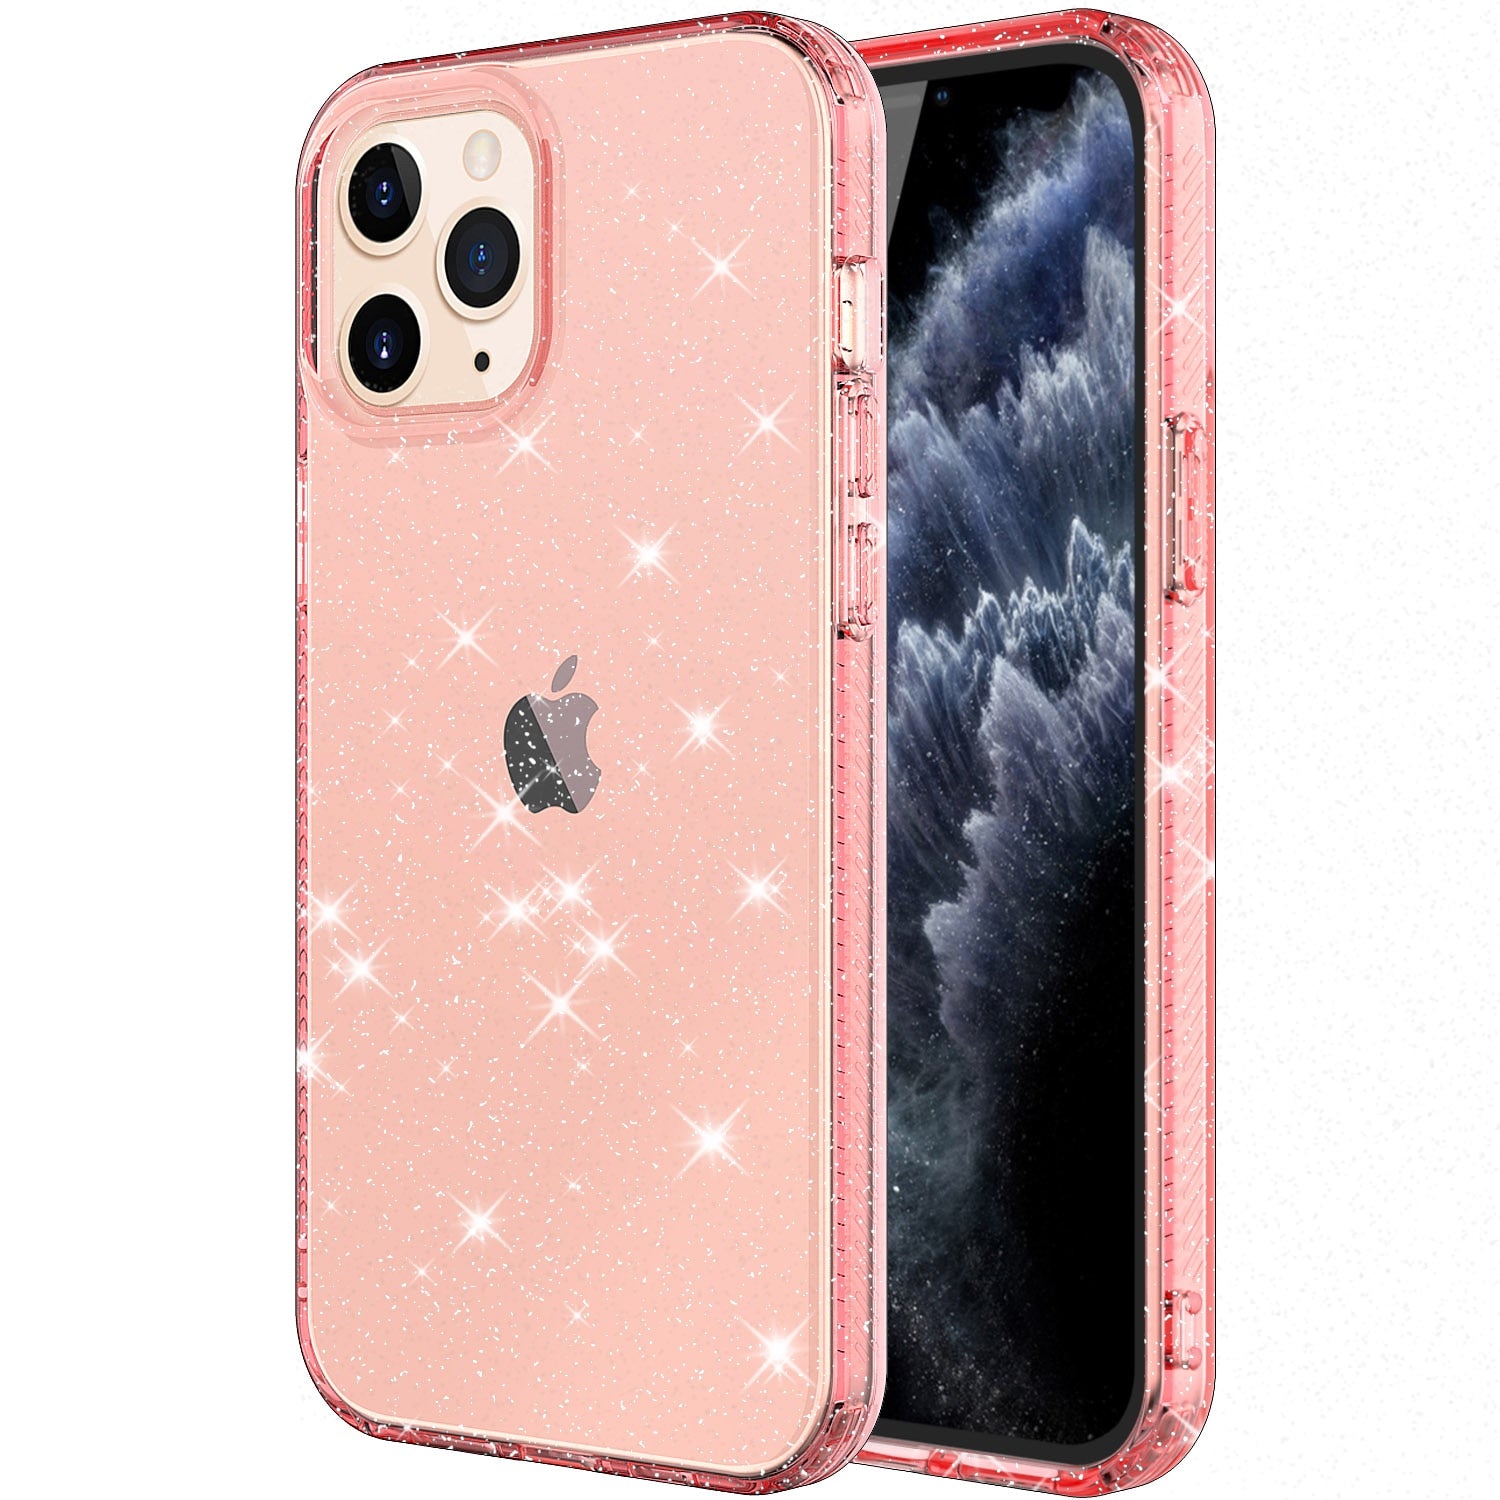 Glitter Case For Apple iPhone 12 Mini Case iPhone 12 Pro Max 5G Cover Clear Matte Anti-fall for iPhone 12 Pro - 5G - 380230 Find Epic Store